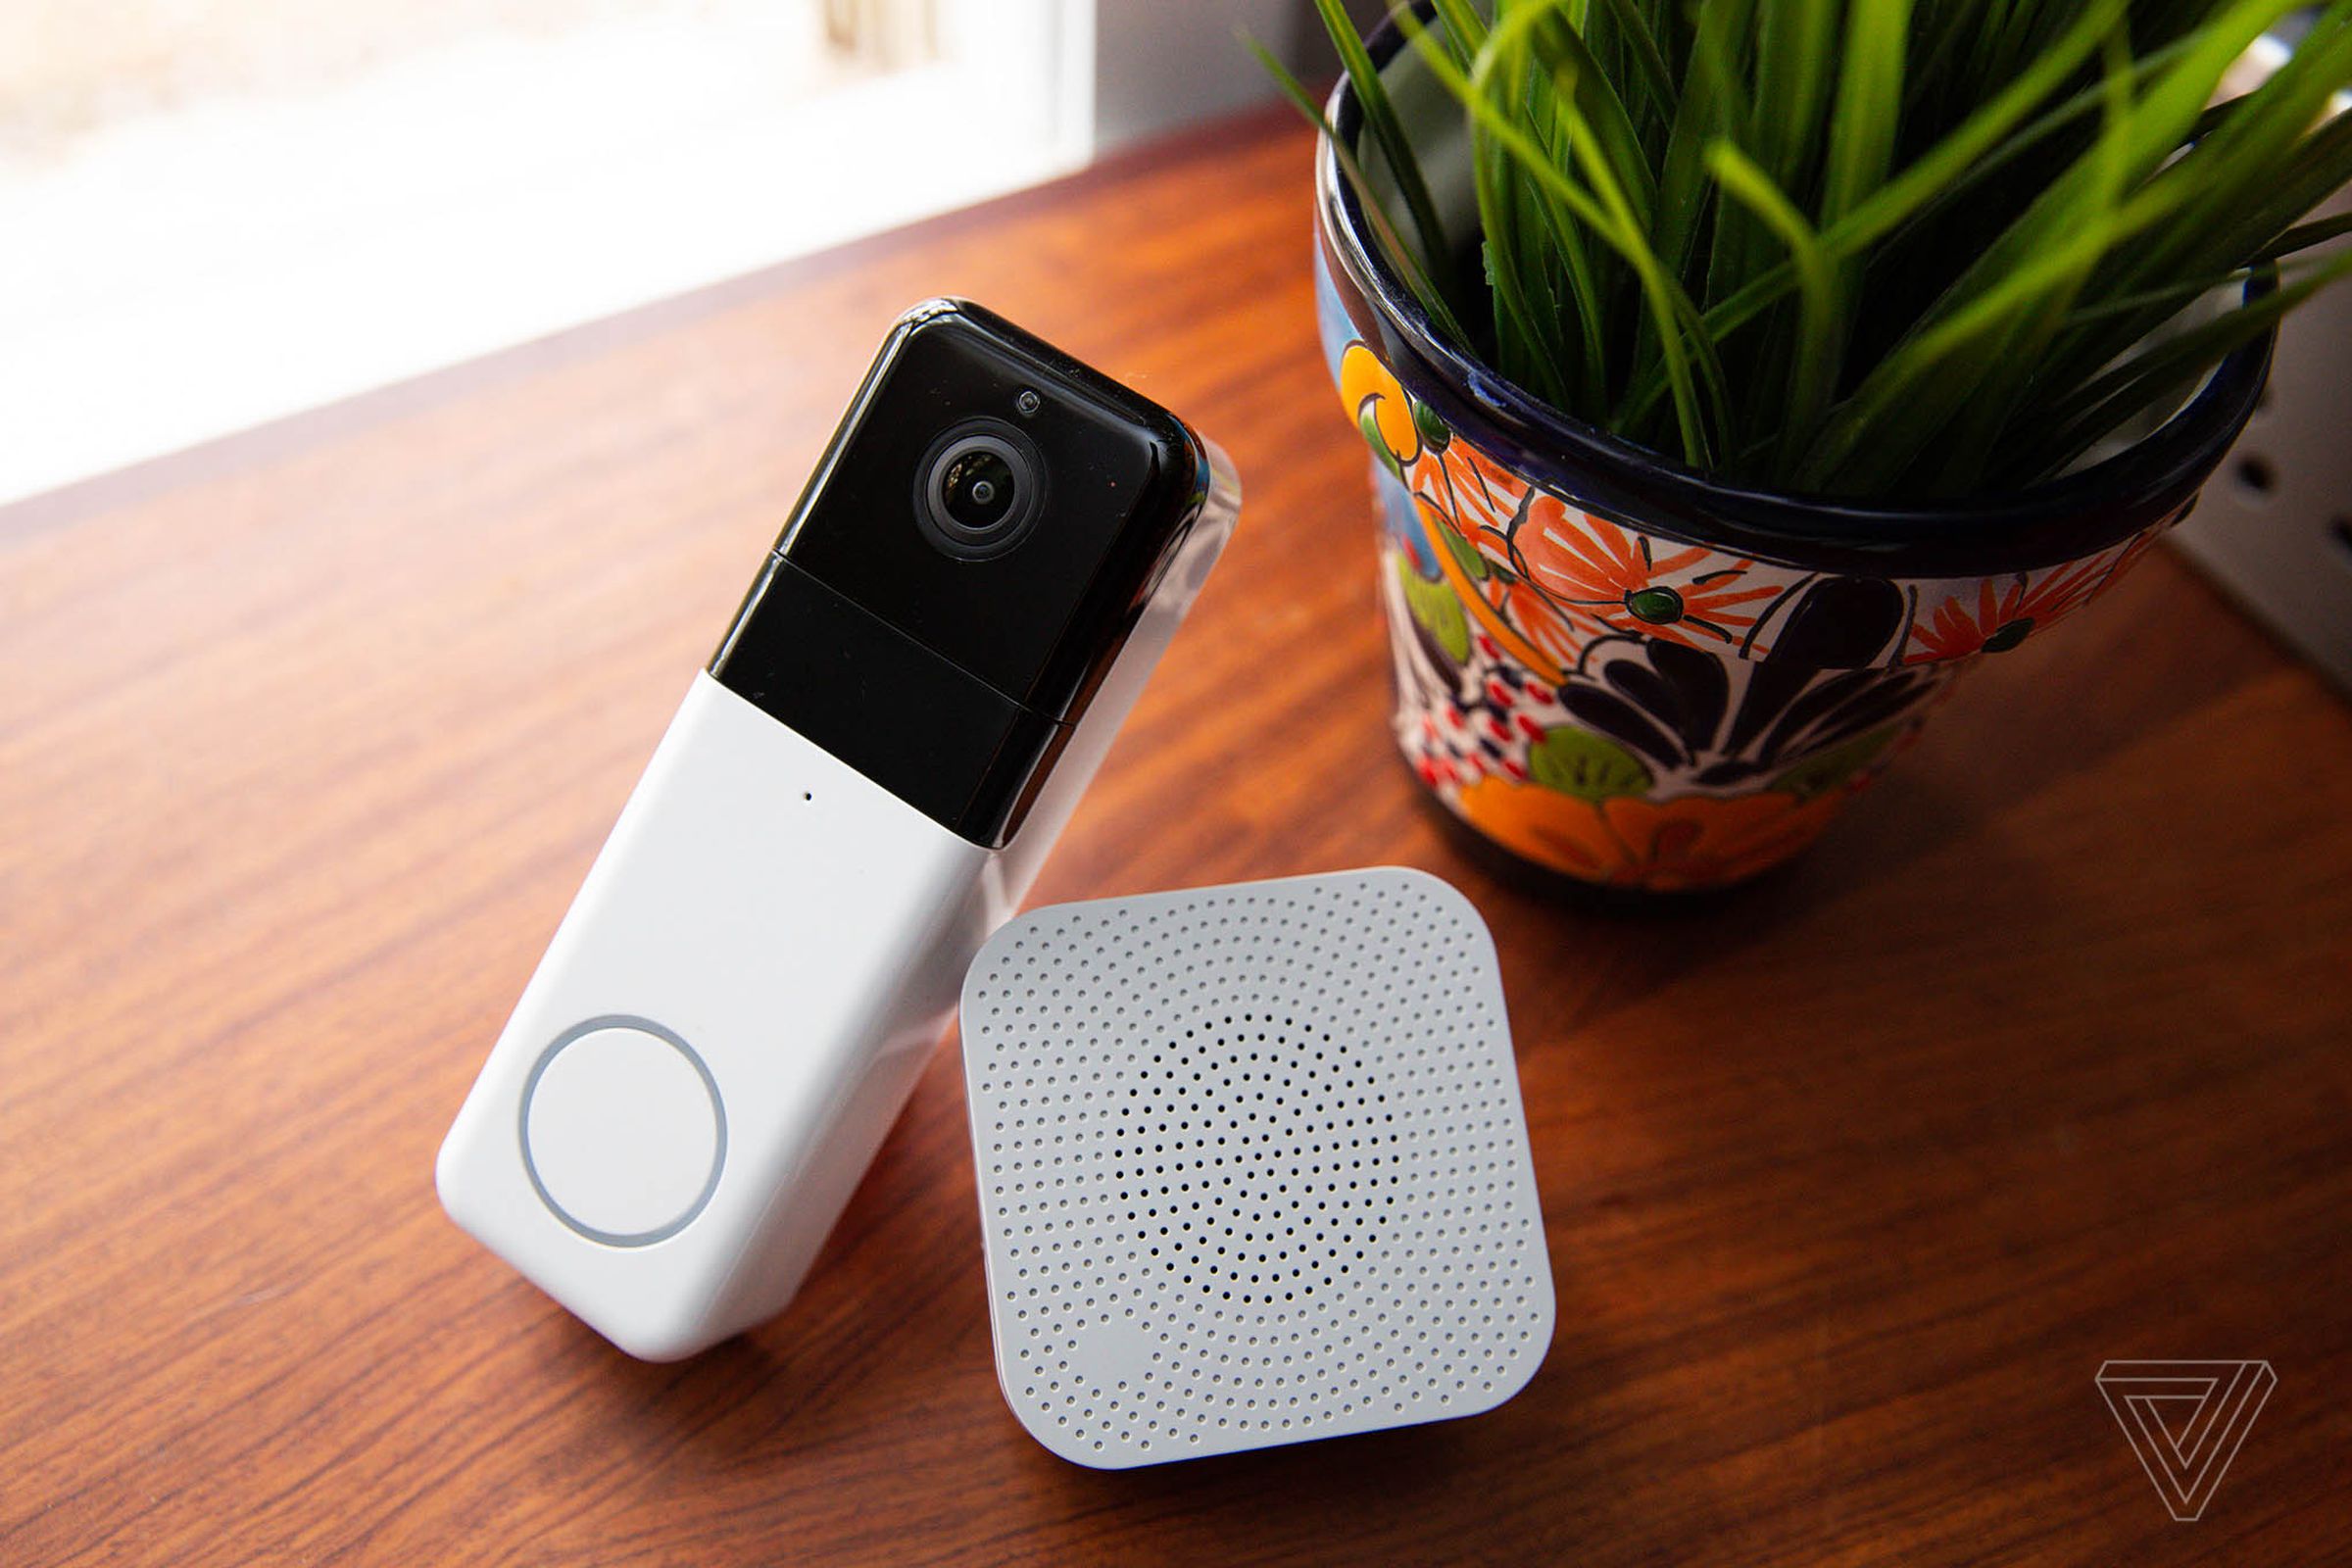 The Wyze Pro comes with a chime / Wi-Fi extender to help with connectivity.